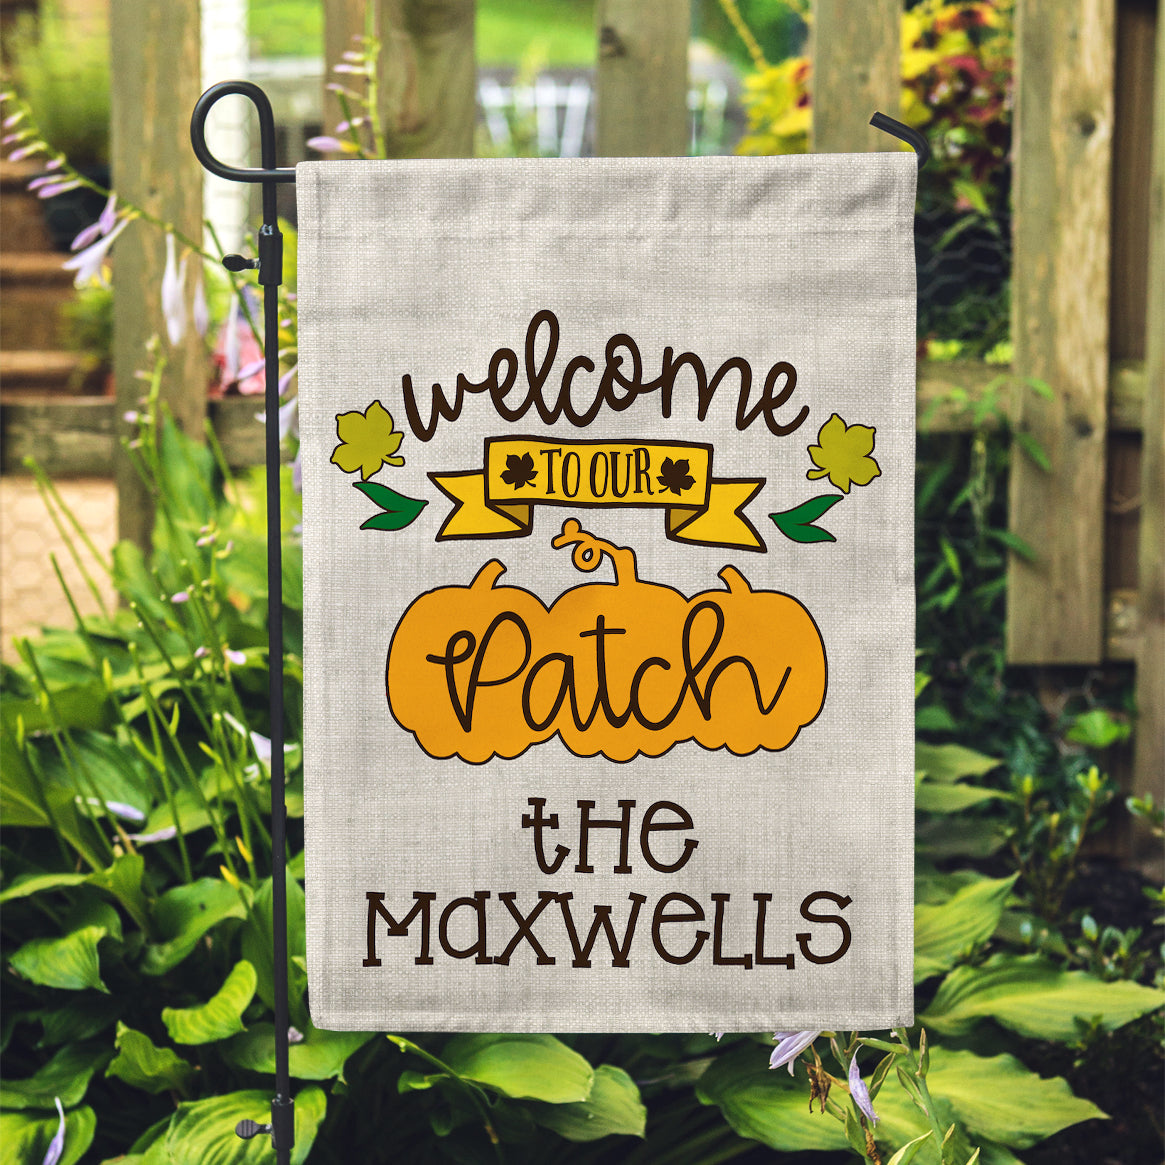 Personalized Garden Flag - Our Patch Custom Home Flag - 12" x 18" - Second East